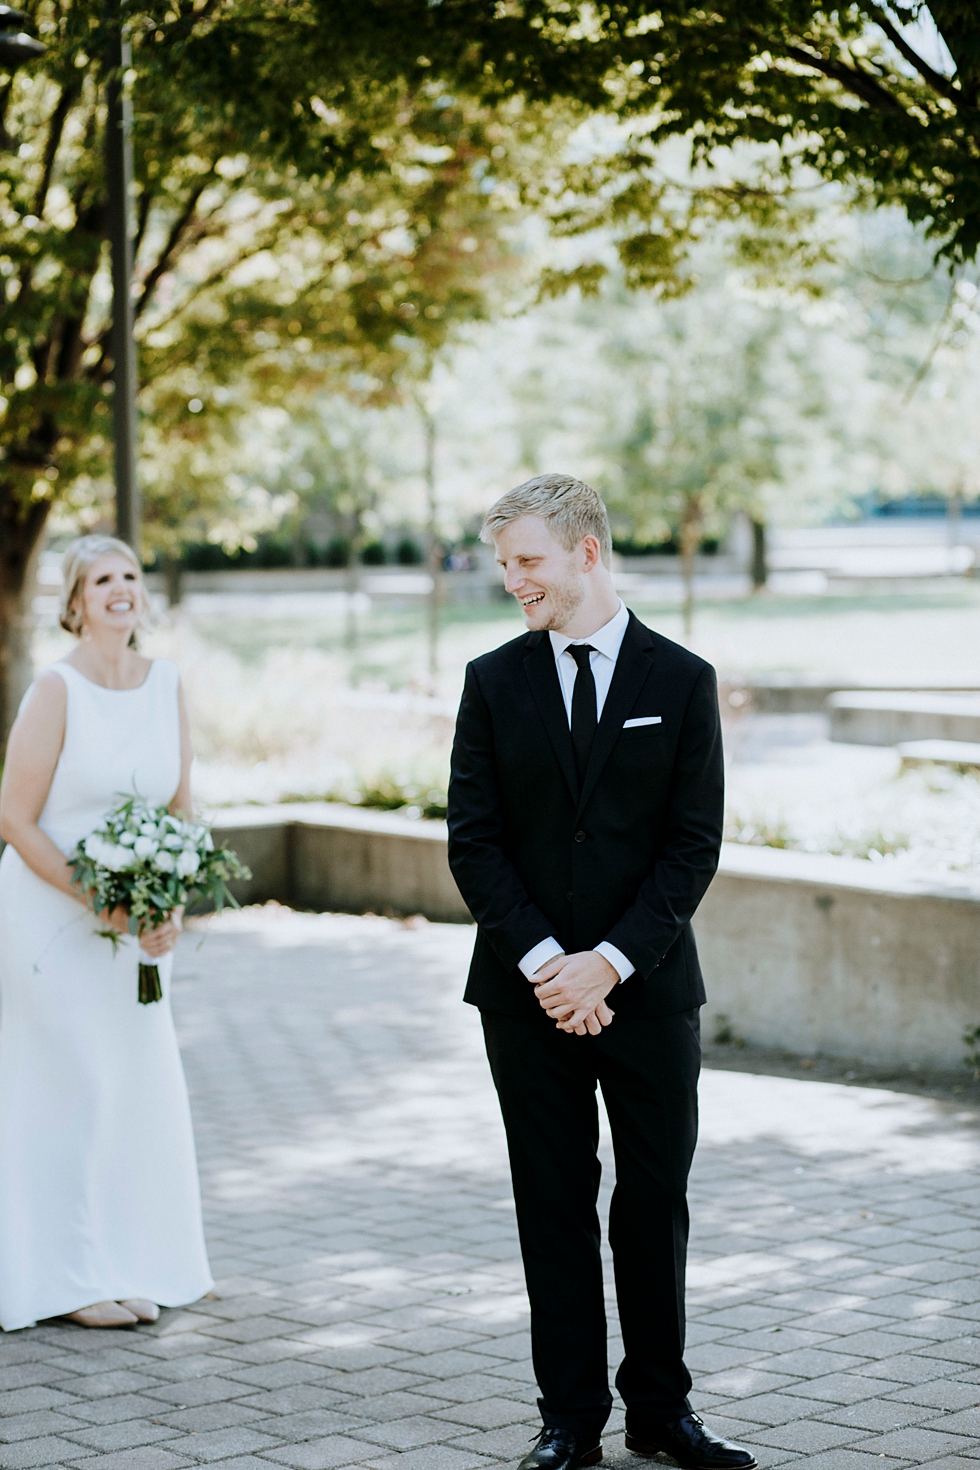  Just second before the groom saw his beautiful bride for the first time on their wedding day #weddinggoals #weddingphotographer #married #ceremonyandreception #kentuckyphotographer #indianaphotographer #louisvillephotographer #weddingphotos #husband